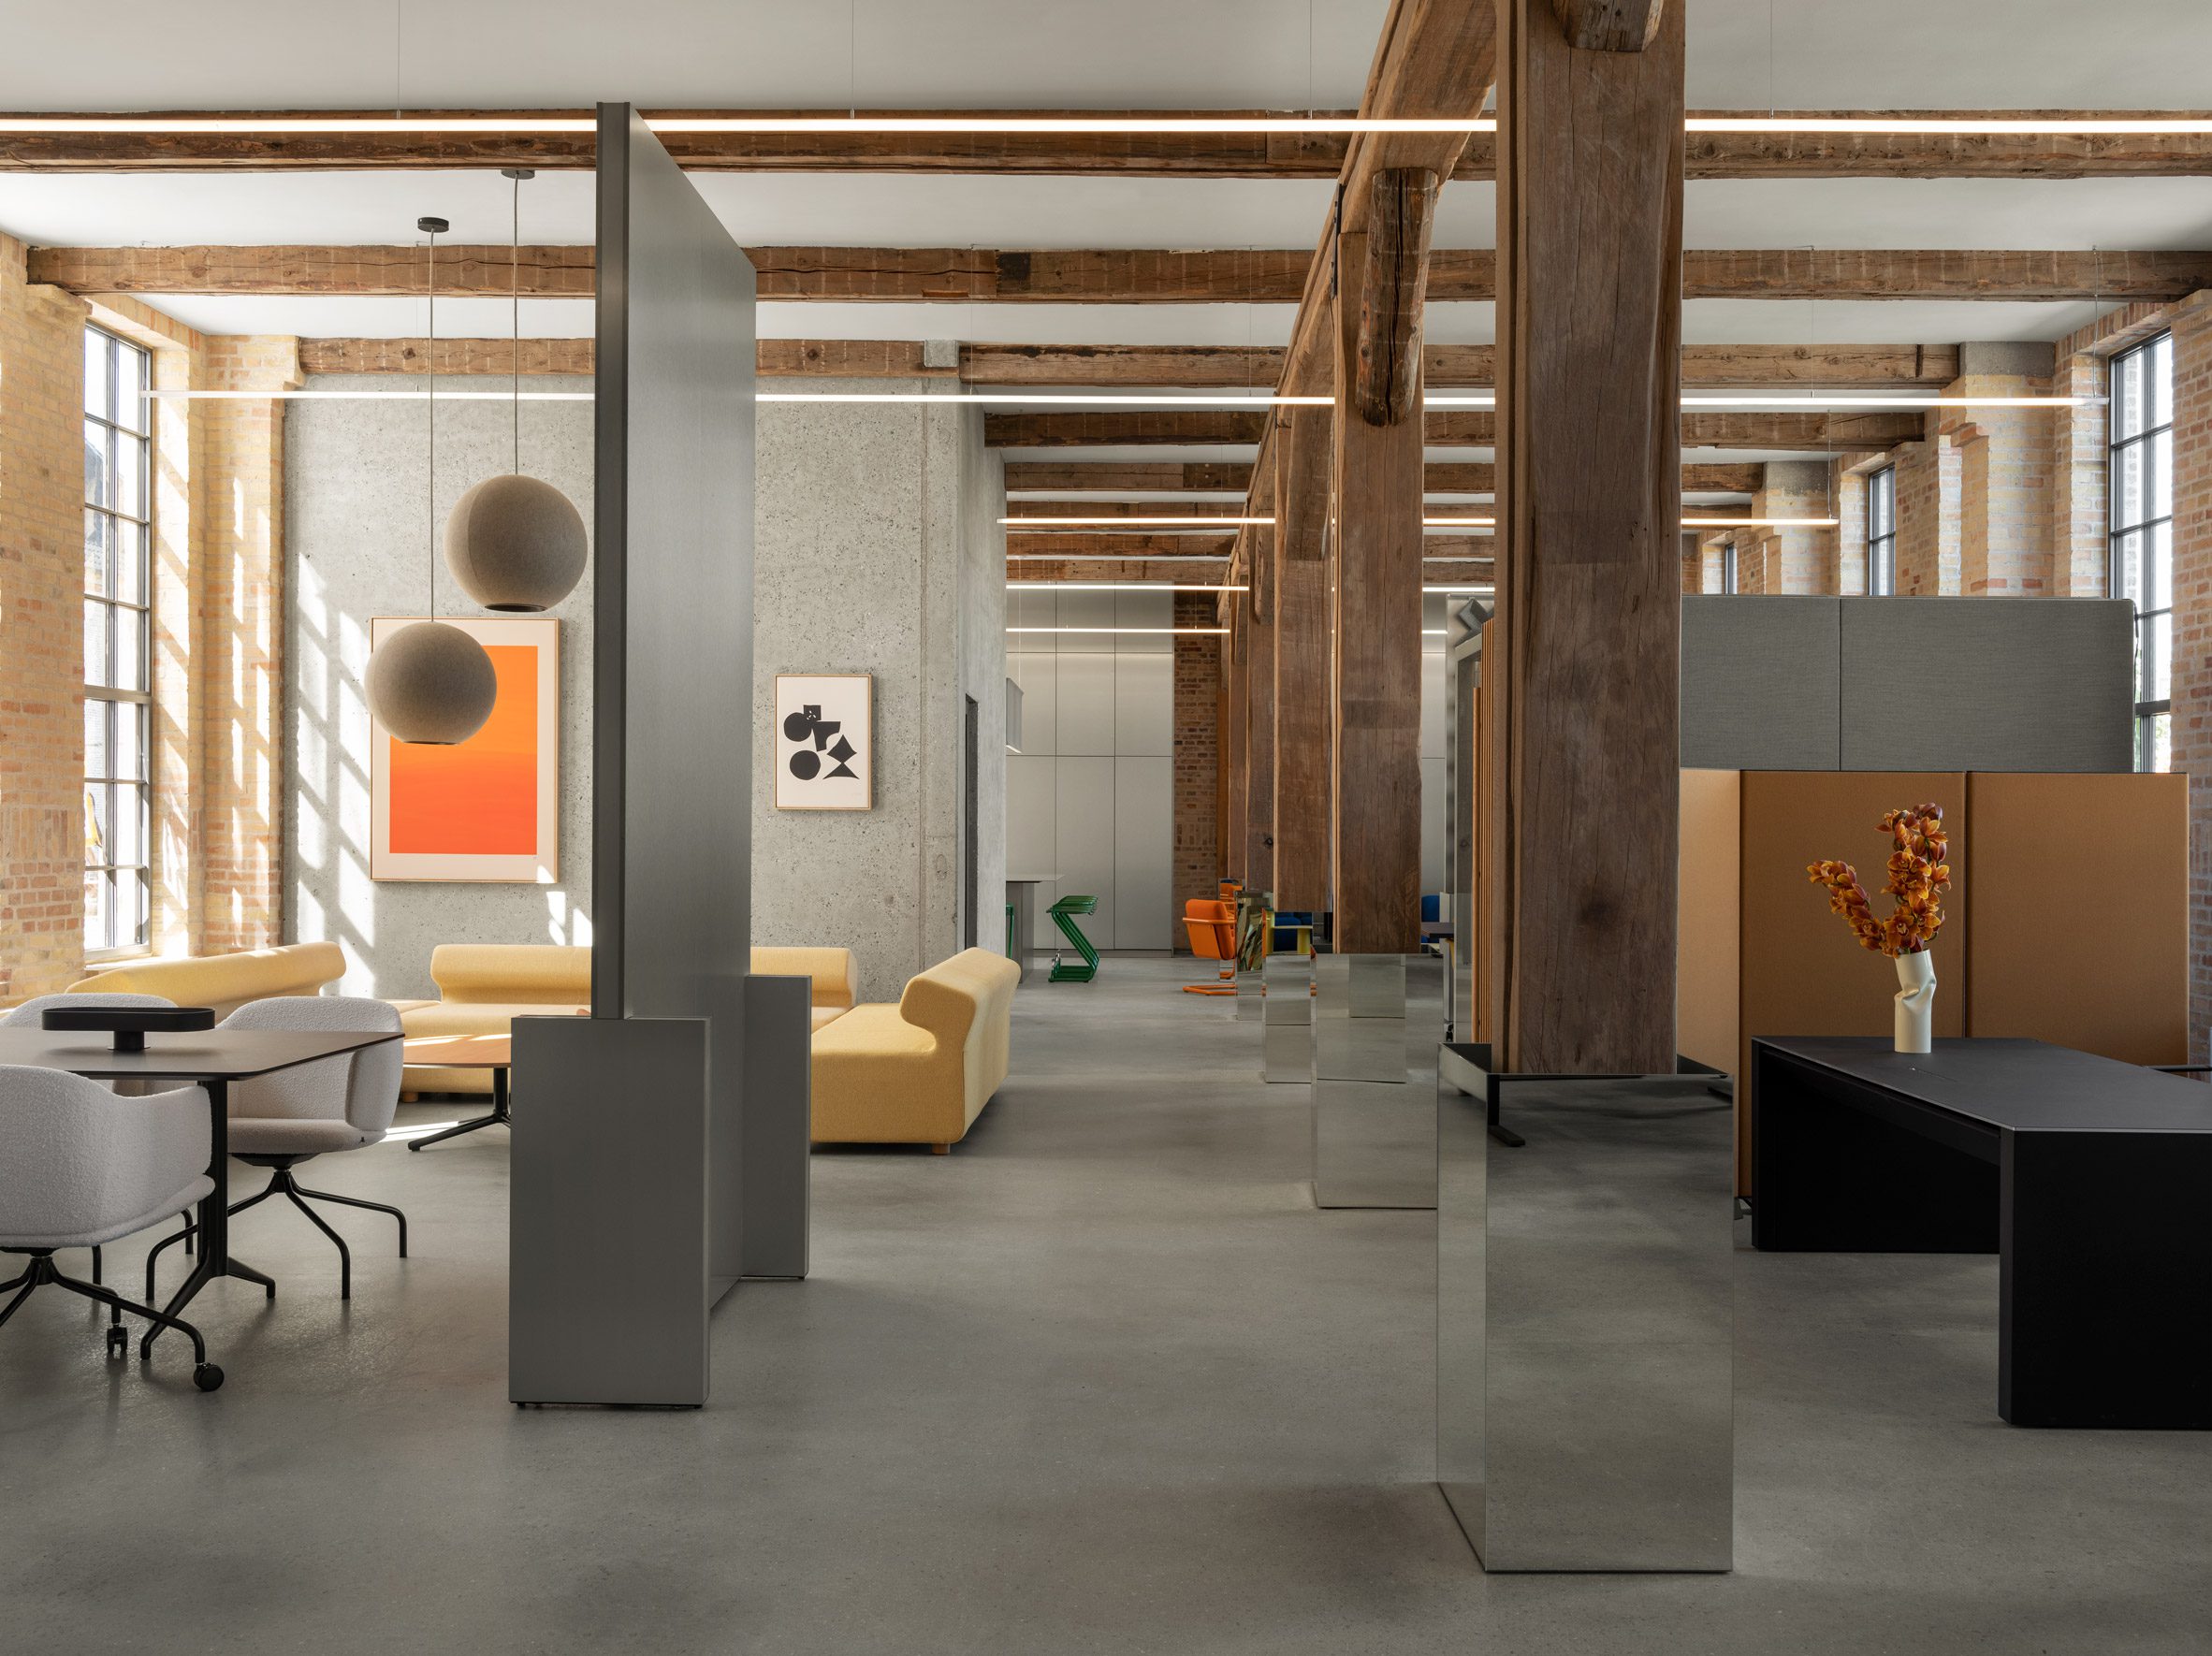 Photograph of an office featuring Lammhults Design Group's products